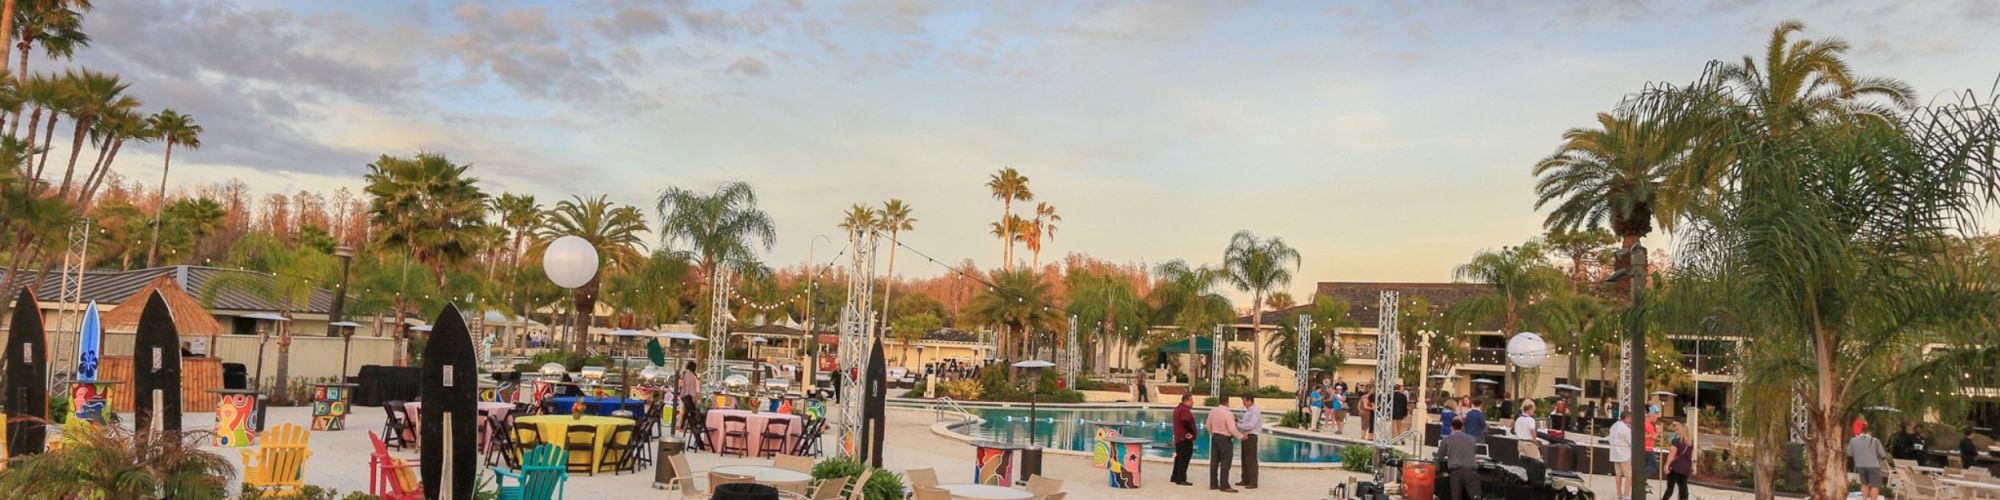 An outdoor event with people around a pool, palm trees, decorative lights, and various seating arrangements.